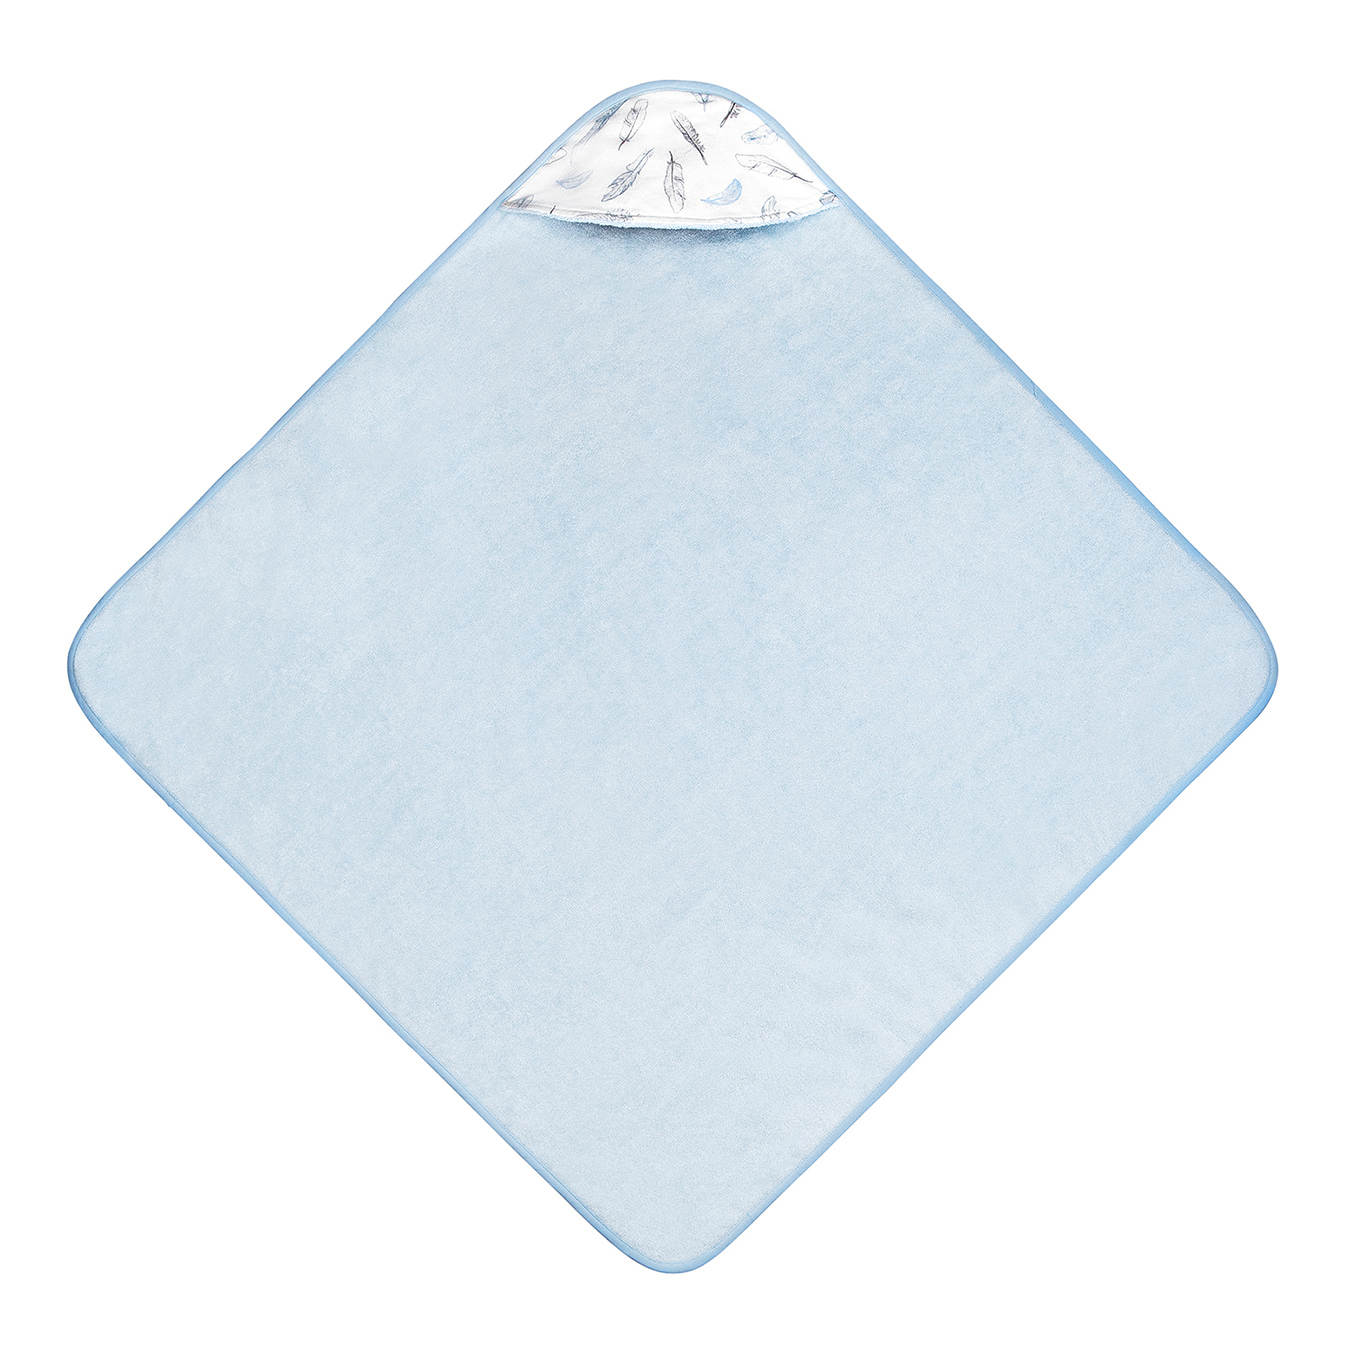 Bamboo baby towel - Heavenly feathers - light blue